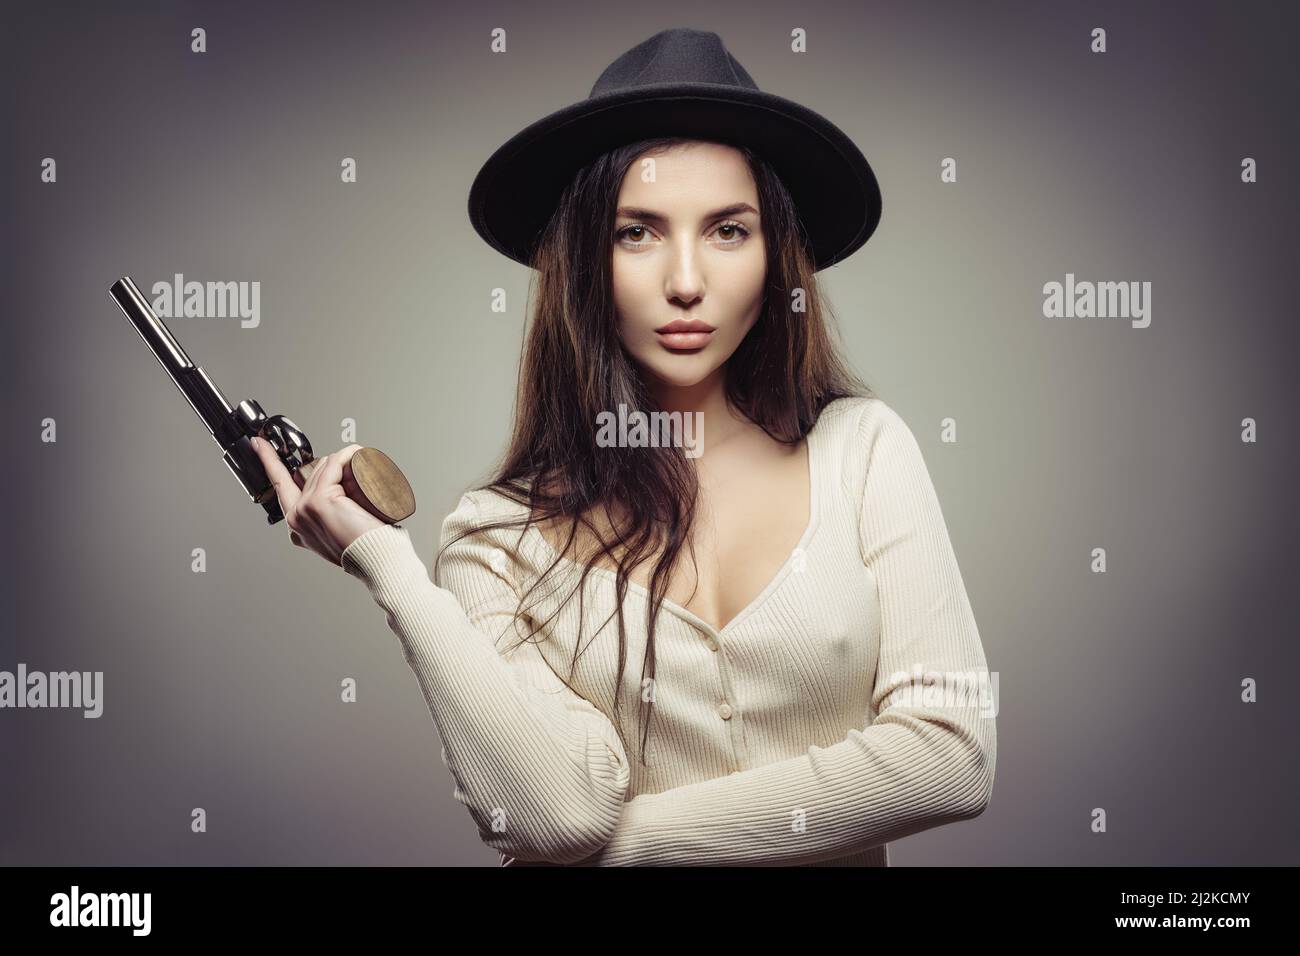 young beauty with a revolver in her hand Stock Photo